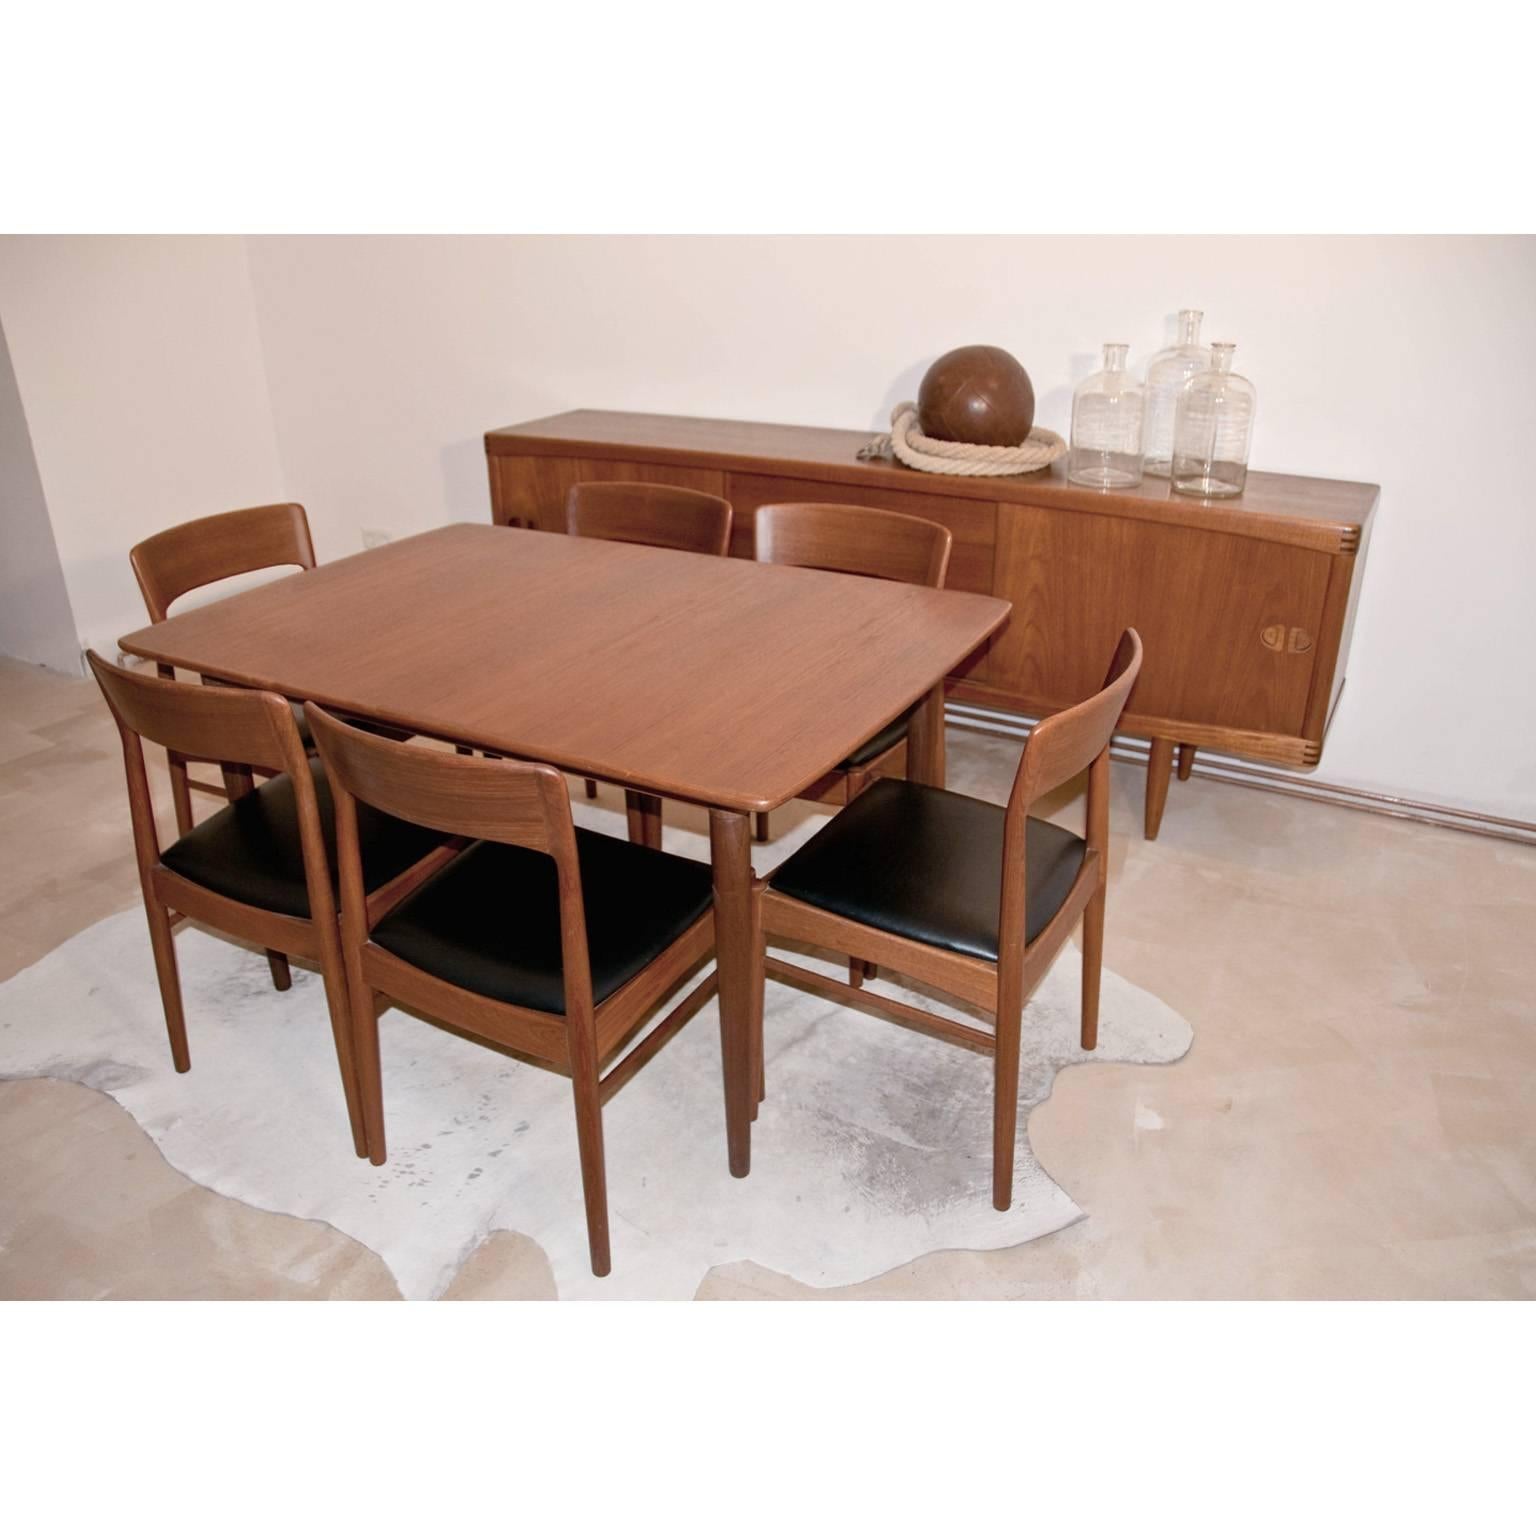 Danish teak dining set for KS Korub Møbler designed by Kai Kristiansen. Take  a note of the very beautiful, sculpted shape of the Chairs. The table comes with three leaves making if very much appropriate to host a large sit down dinner. 